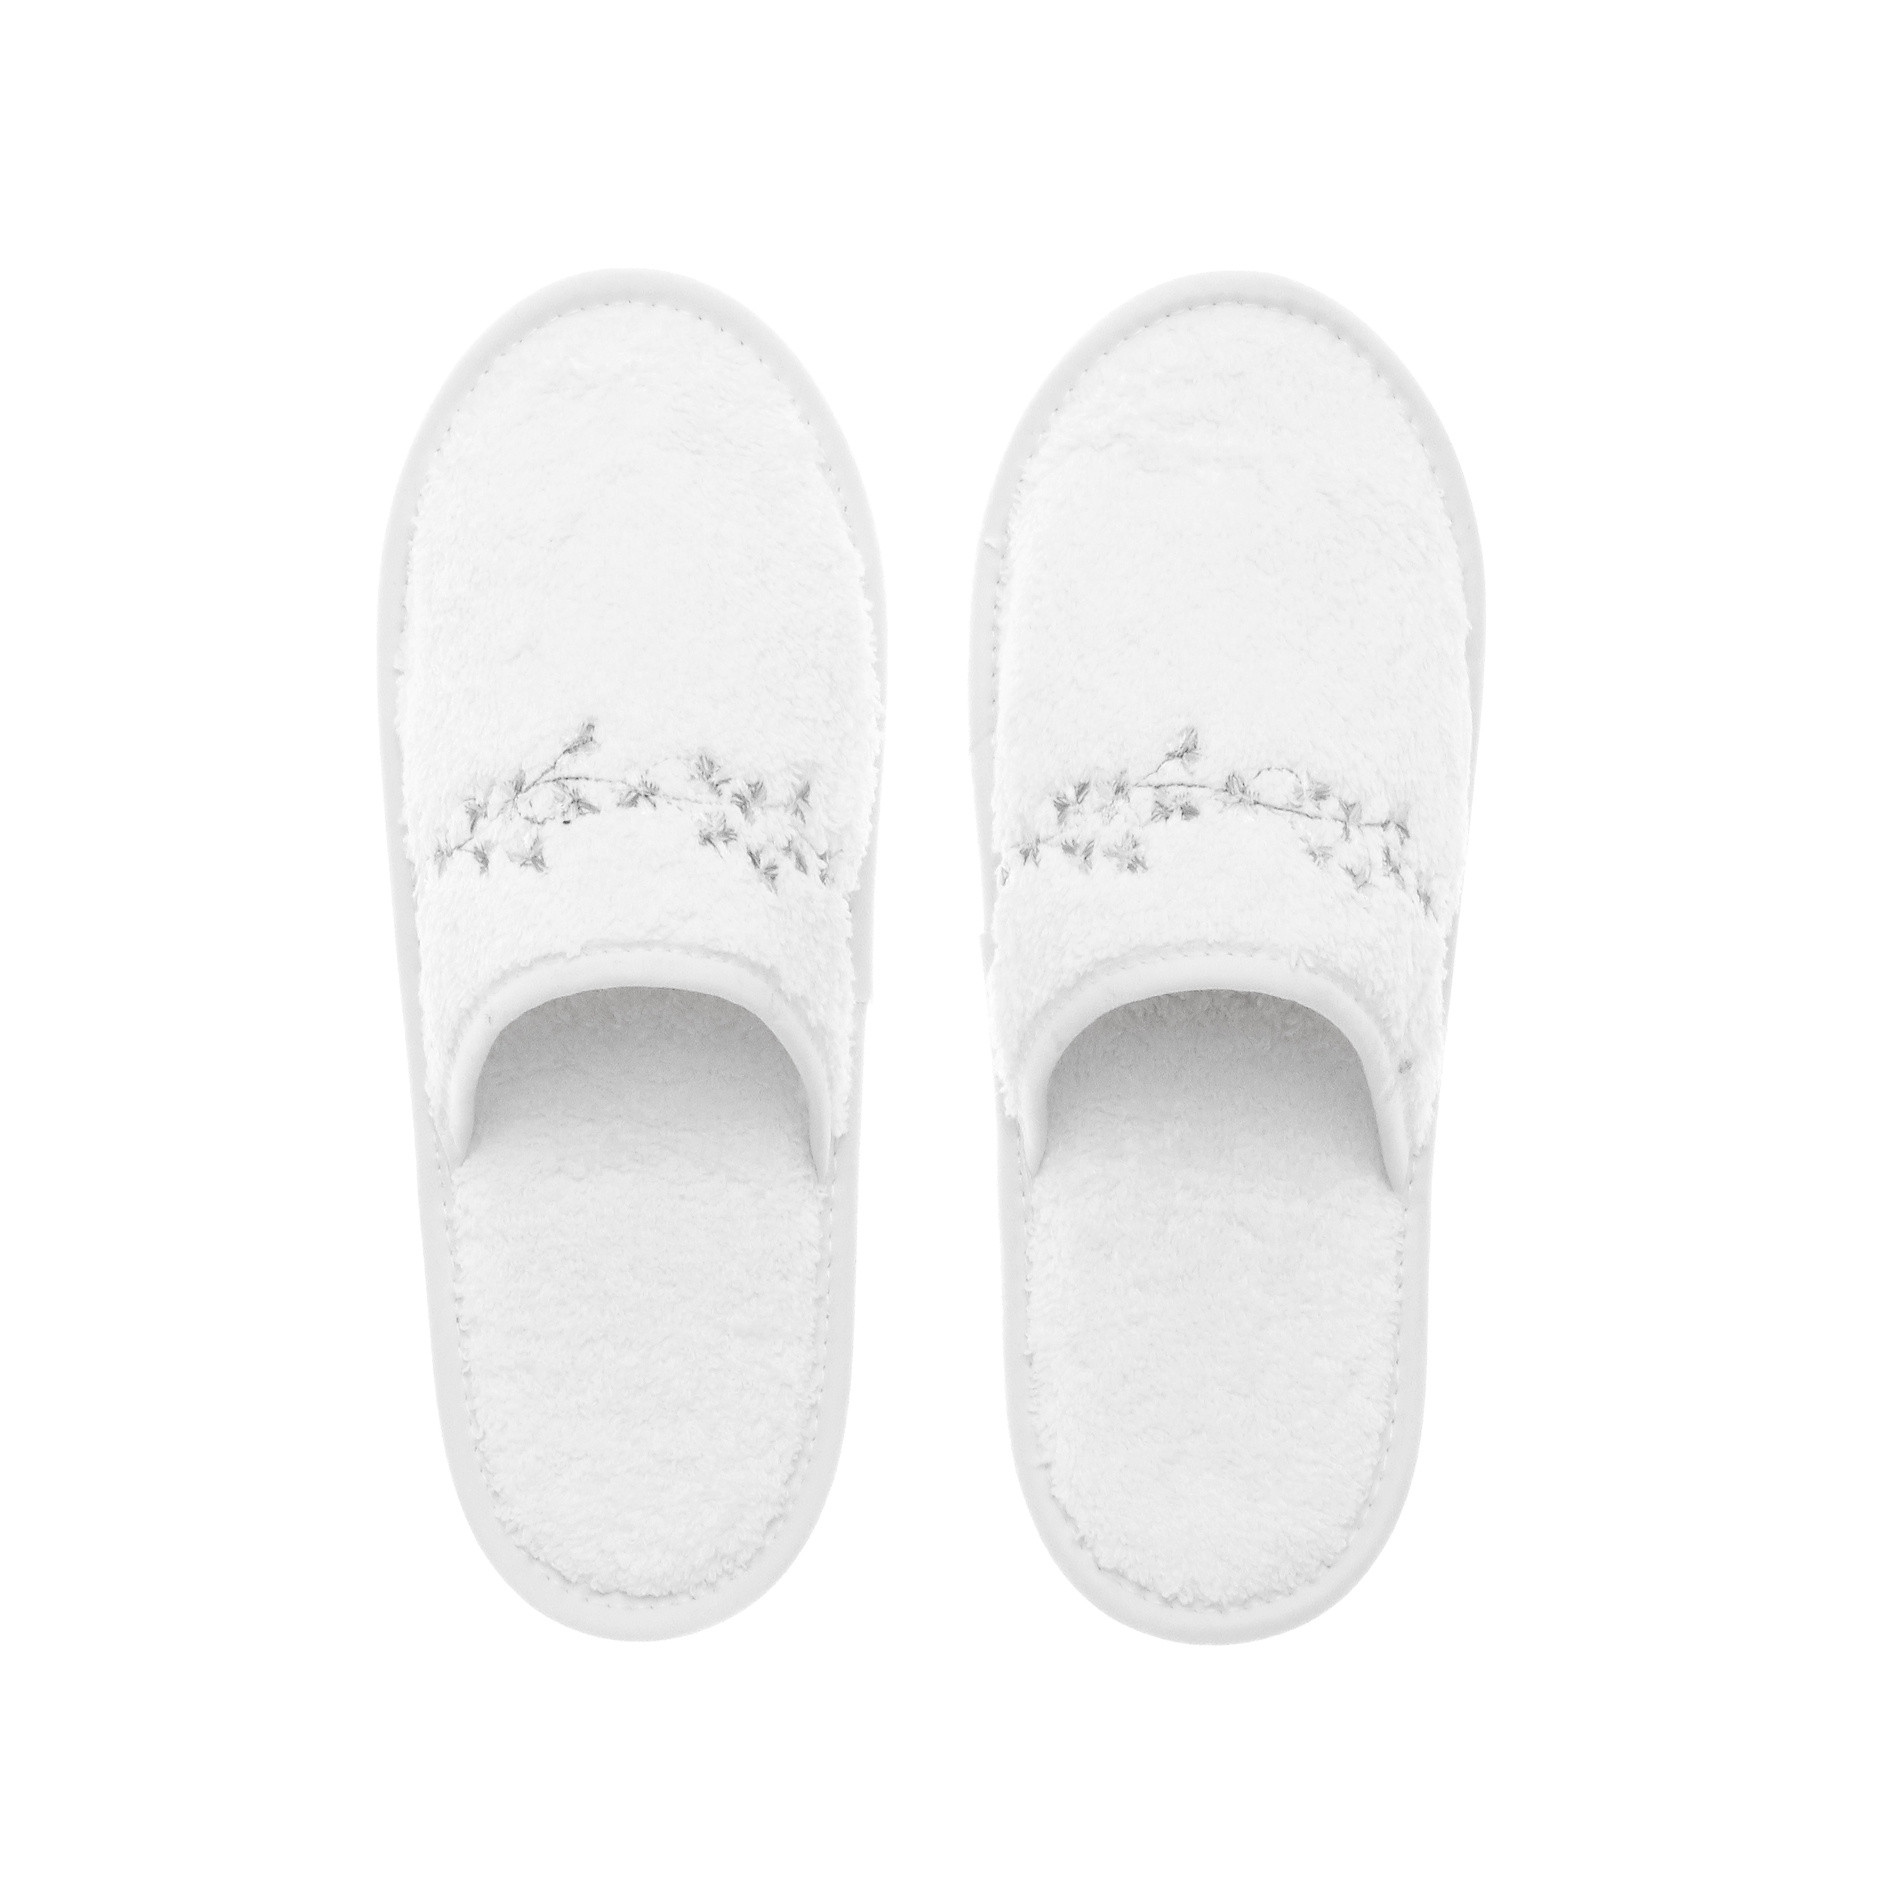 Portofino slippers with embroidery, White, large image number 0